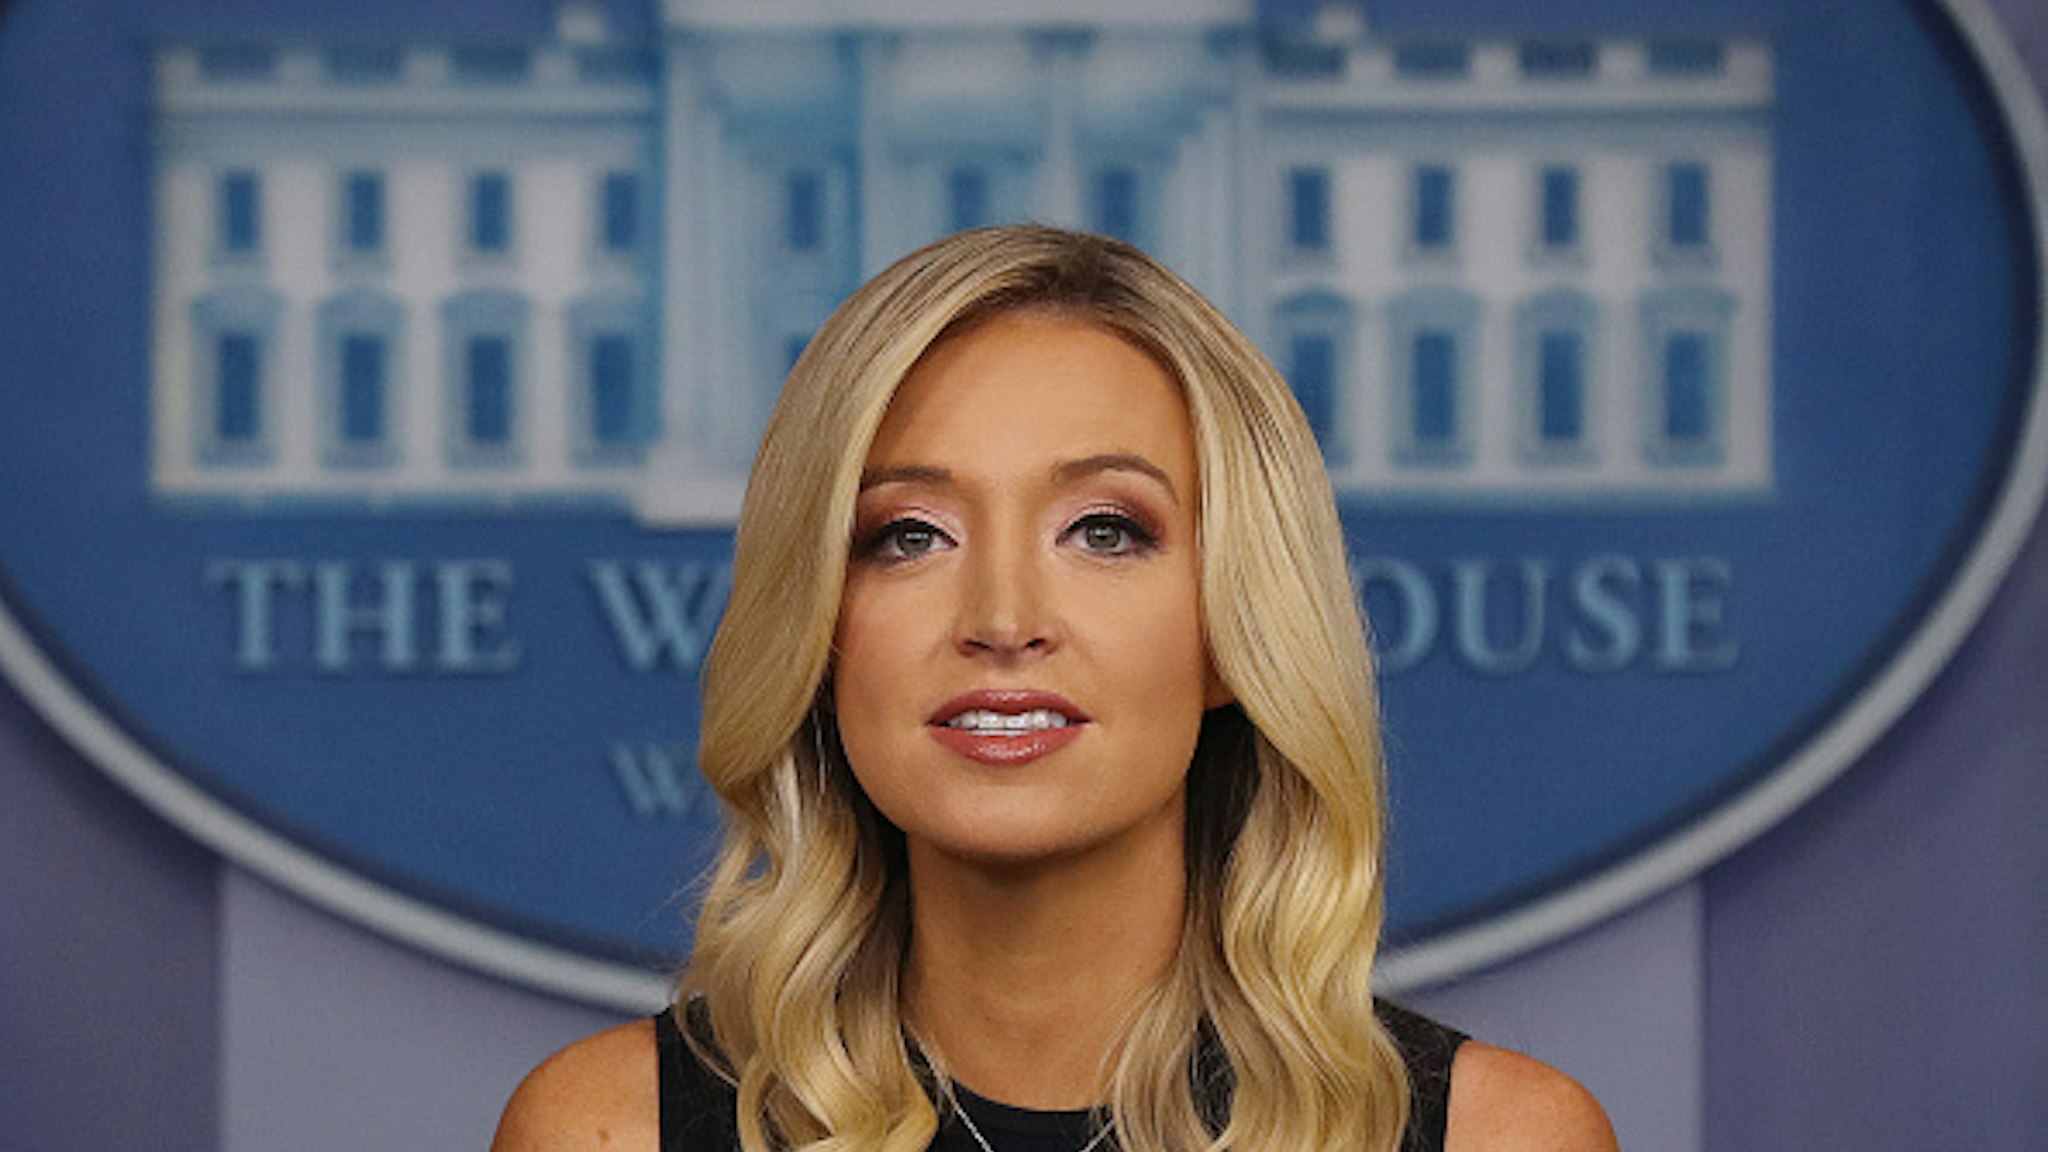 WASHINGTON, DC - JULY 21: White House Press Secretary Kayleigh McEnany speaks during a briefing in the Brady Press Briefing Room at the White House July 21, 2020 in Washington, DC. McEnany took questions from reporters on several topics including President Trump's response to the coronavirus pandemic.